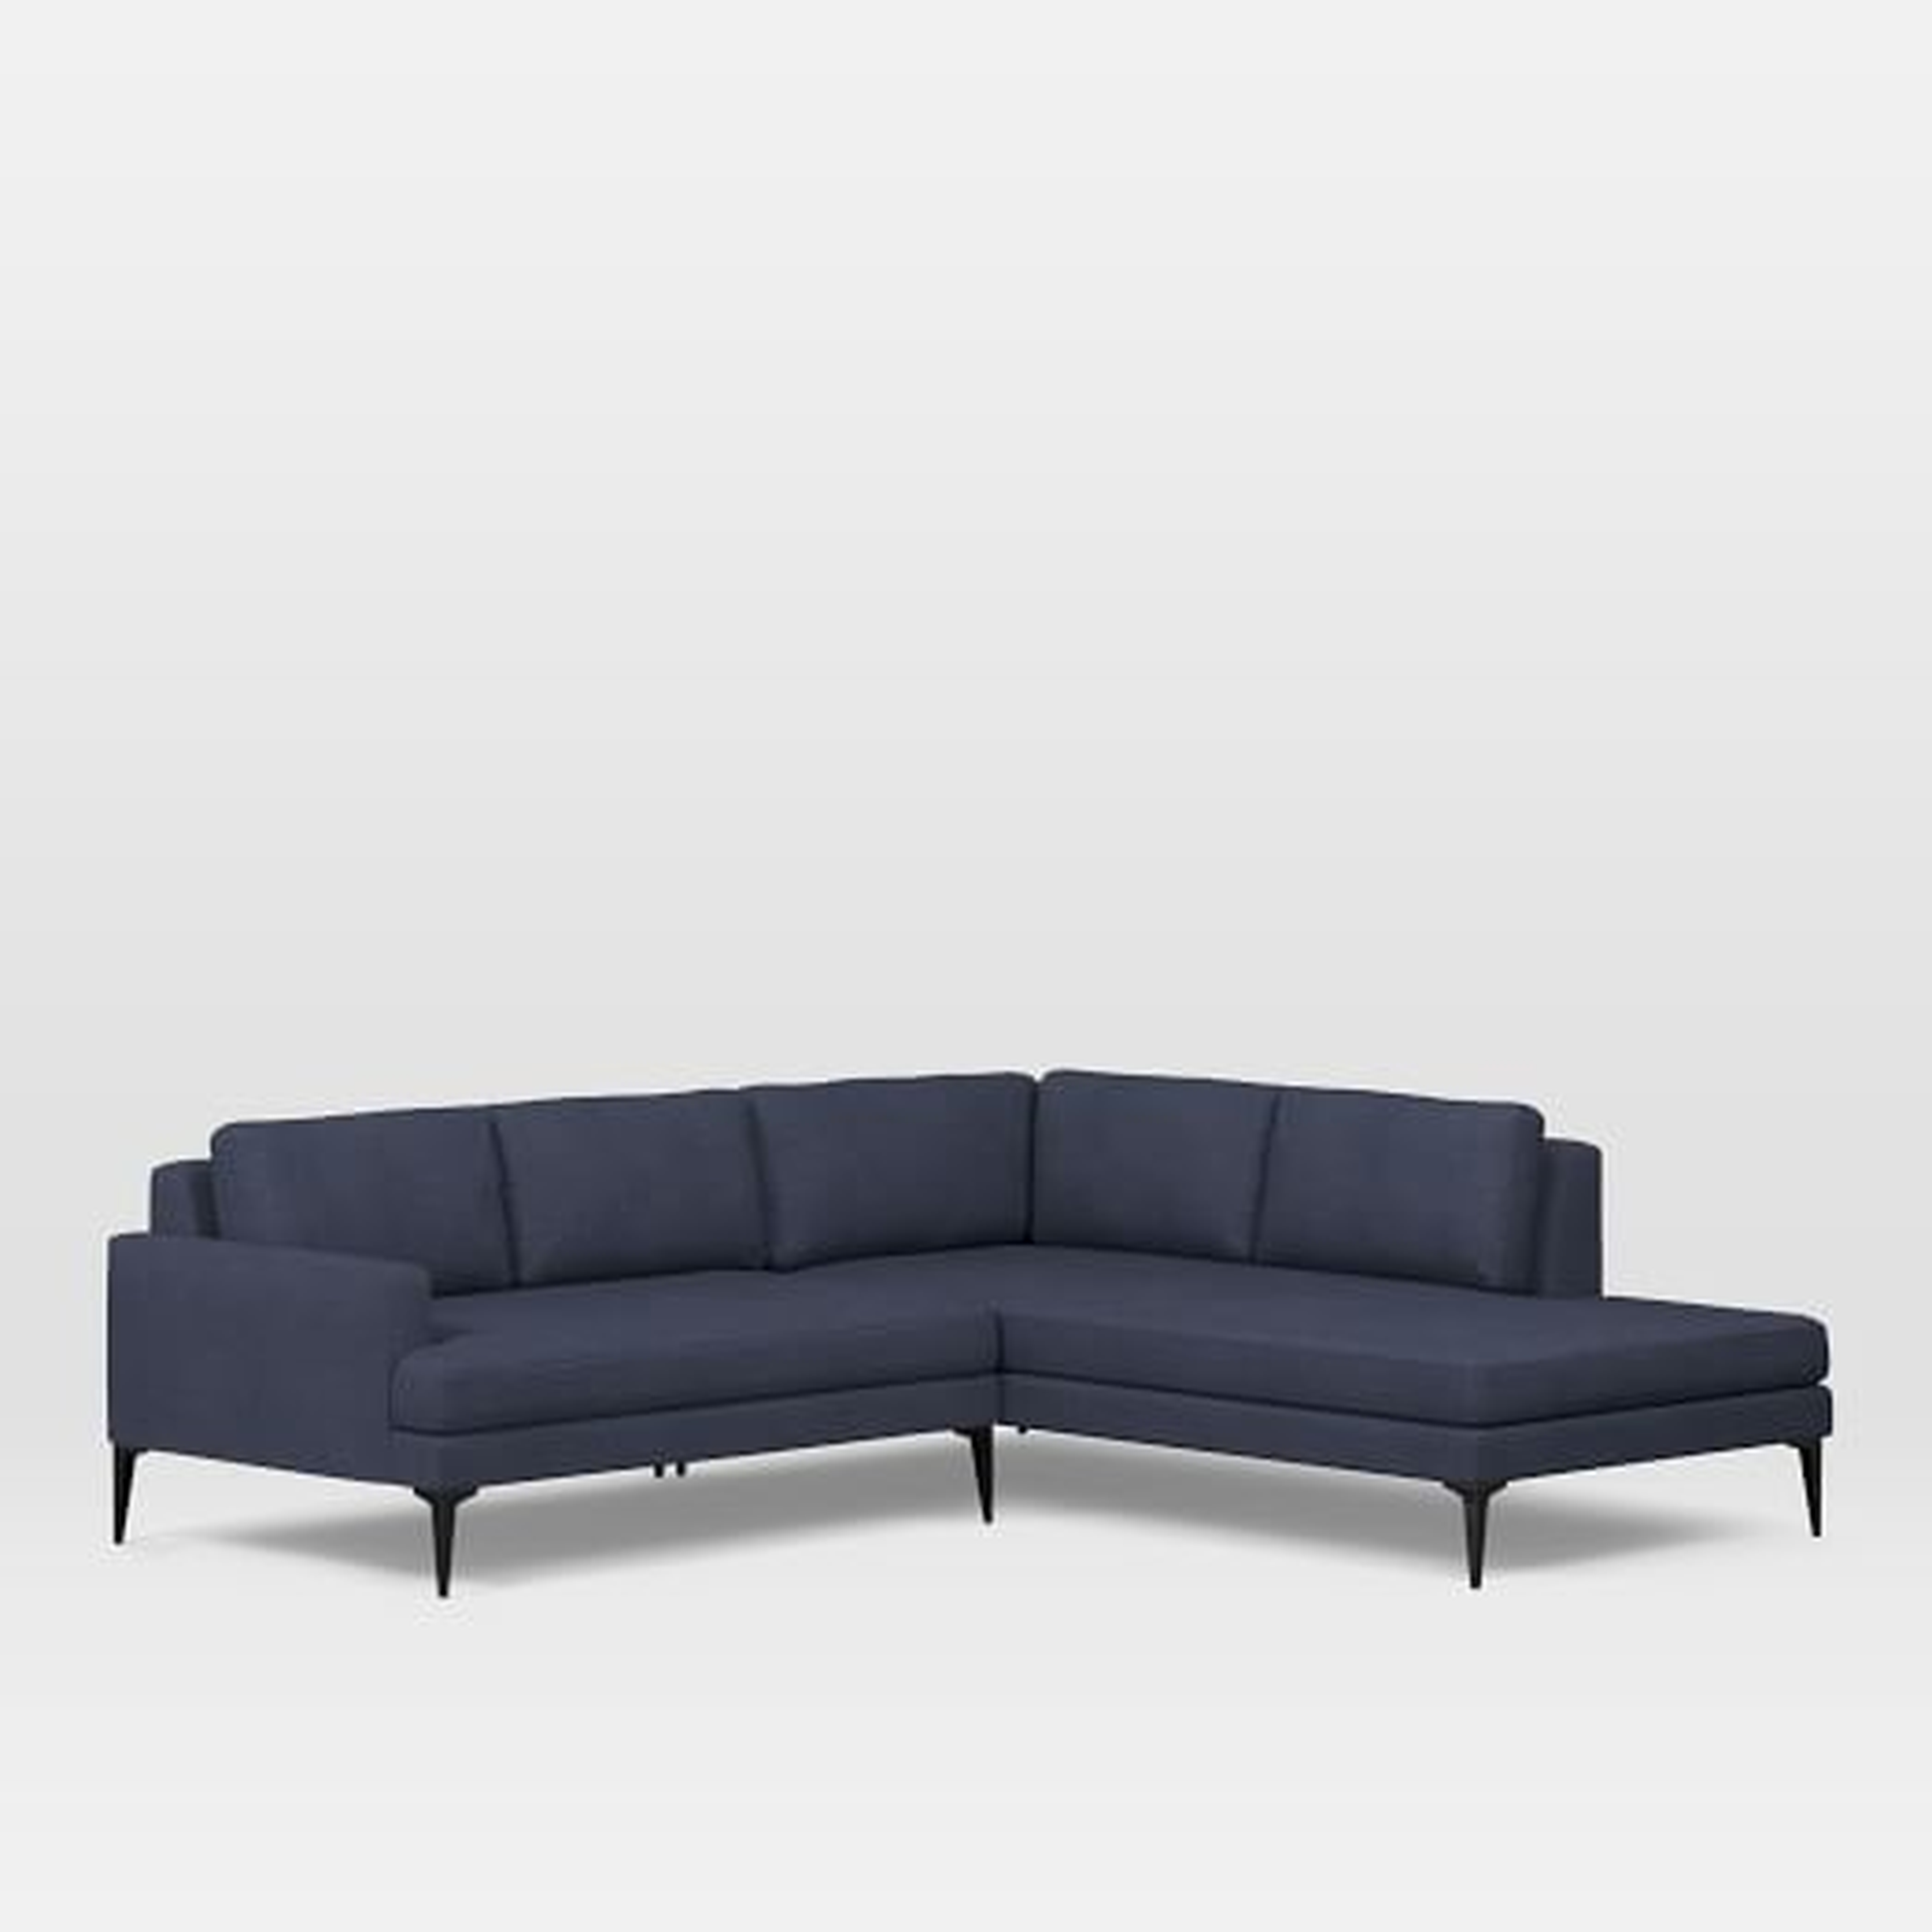 Andes Right Terminal Chaise 2-pc Sectional - Large - Pebble Weave, Aegean Blue - Dark Pewter leg - West Elm